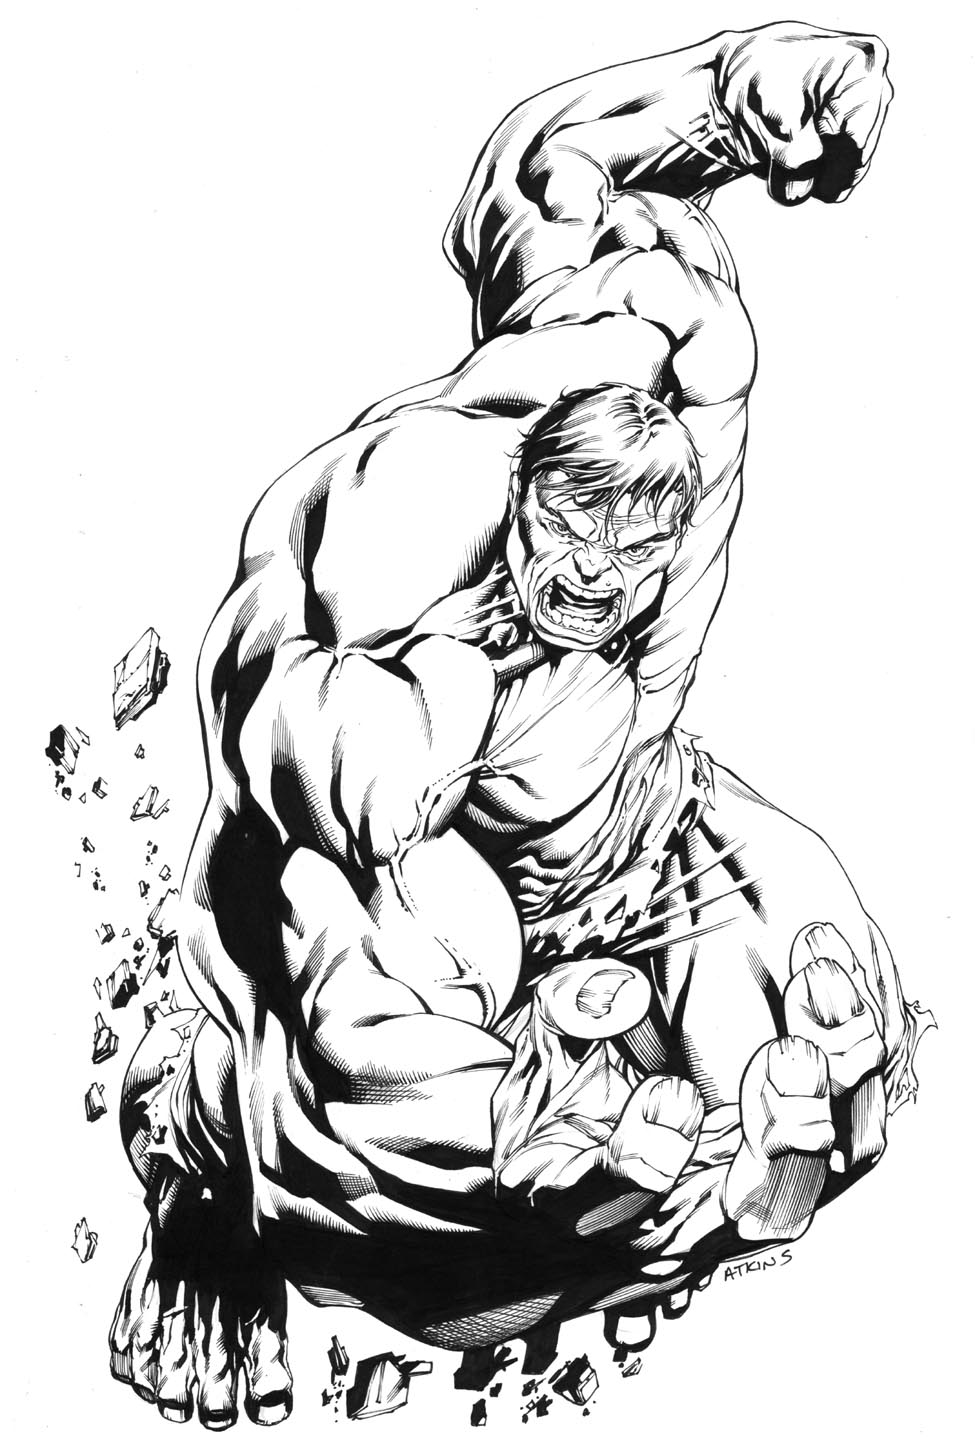 Download Robert Atkins Art: Strongest there is.....